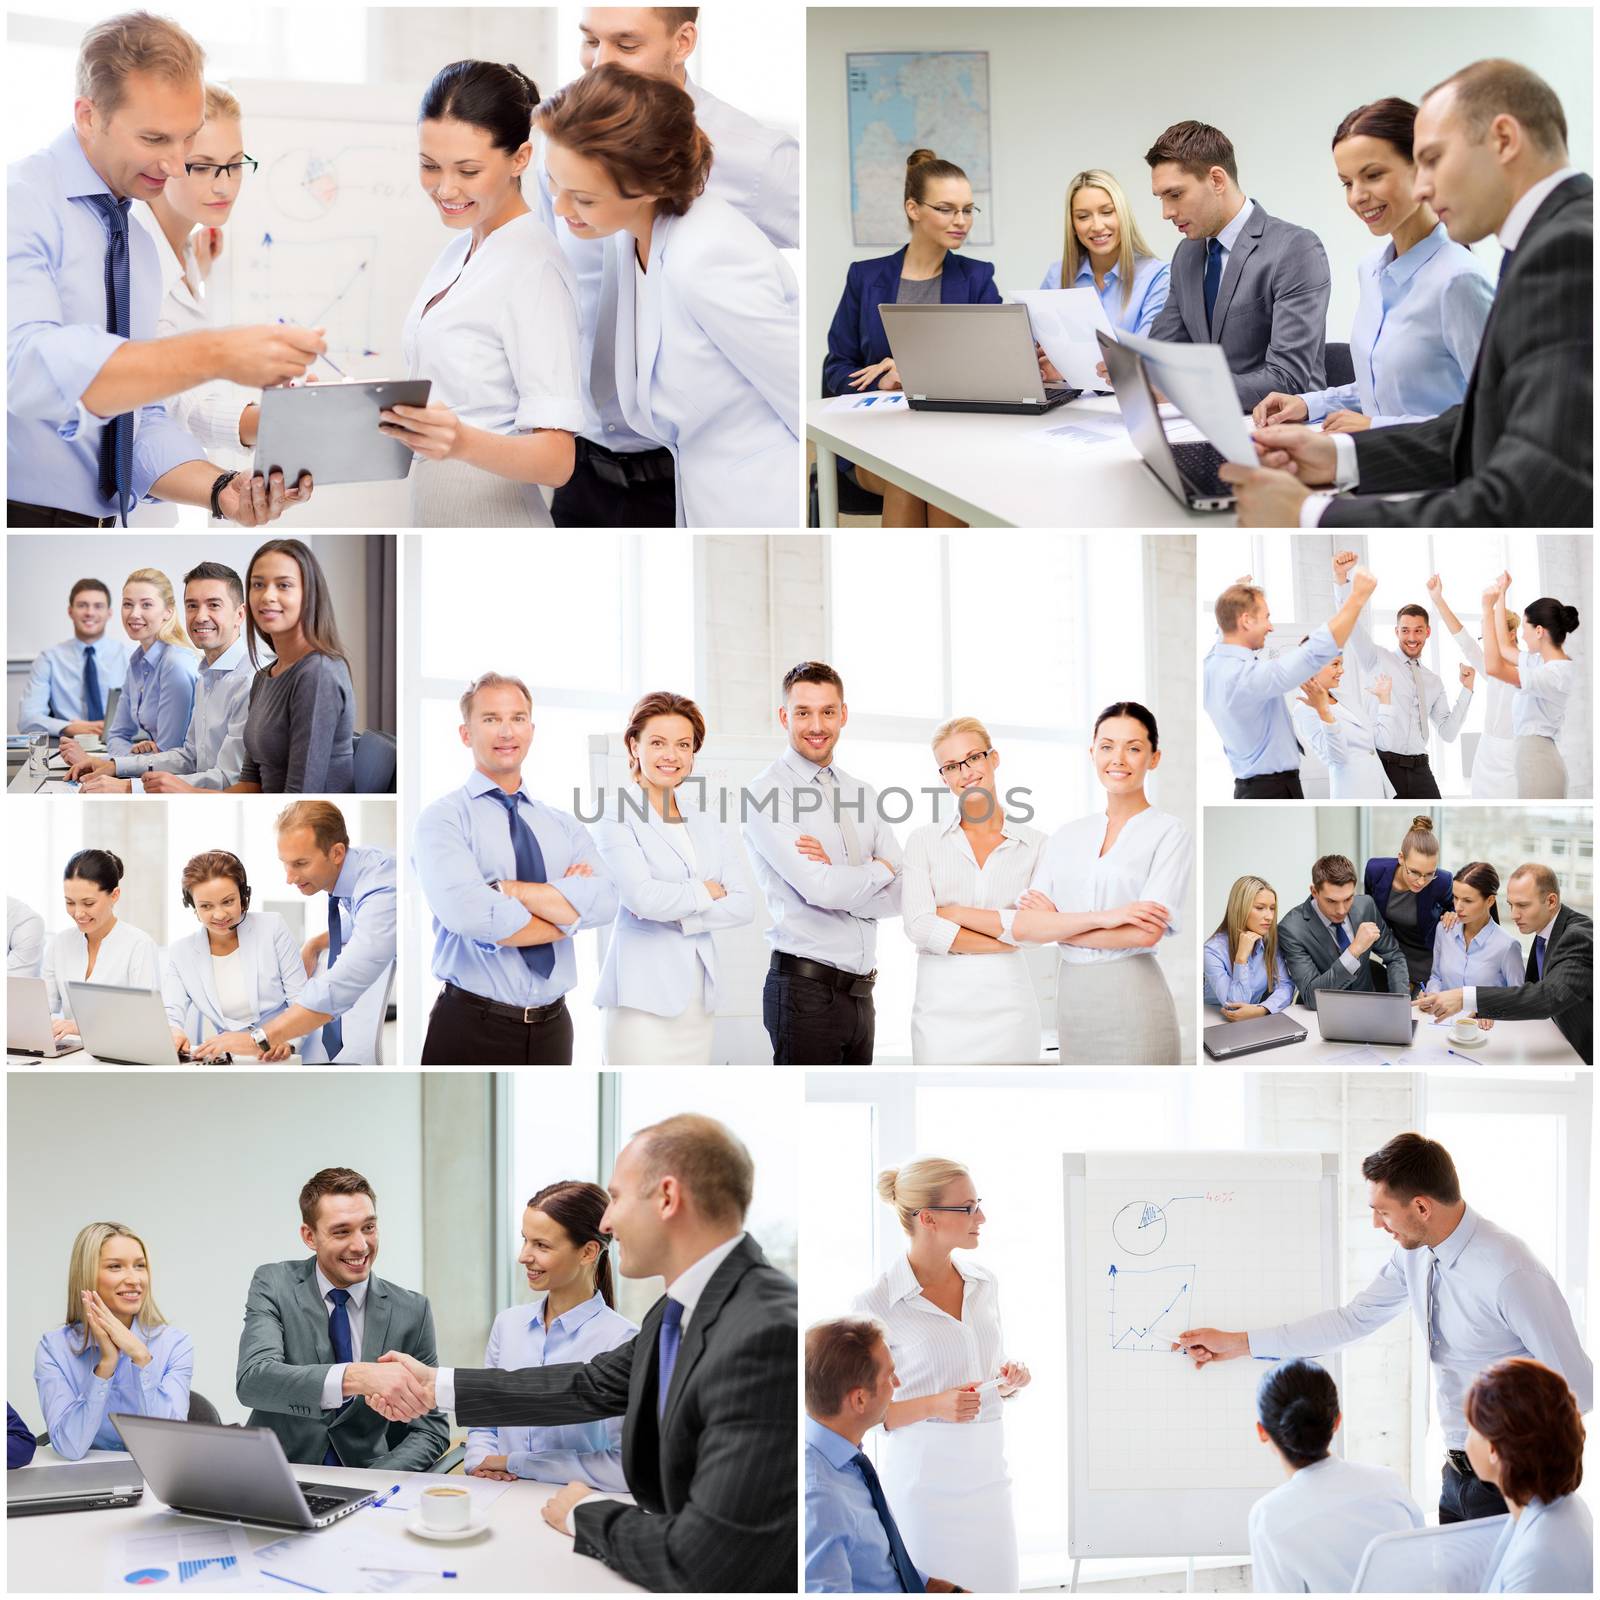 collage with many business people in office by dolgachov